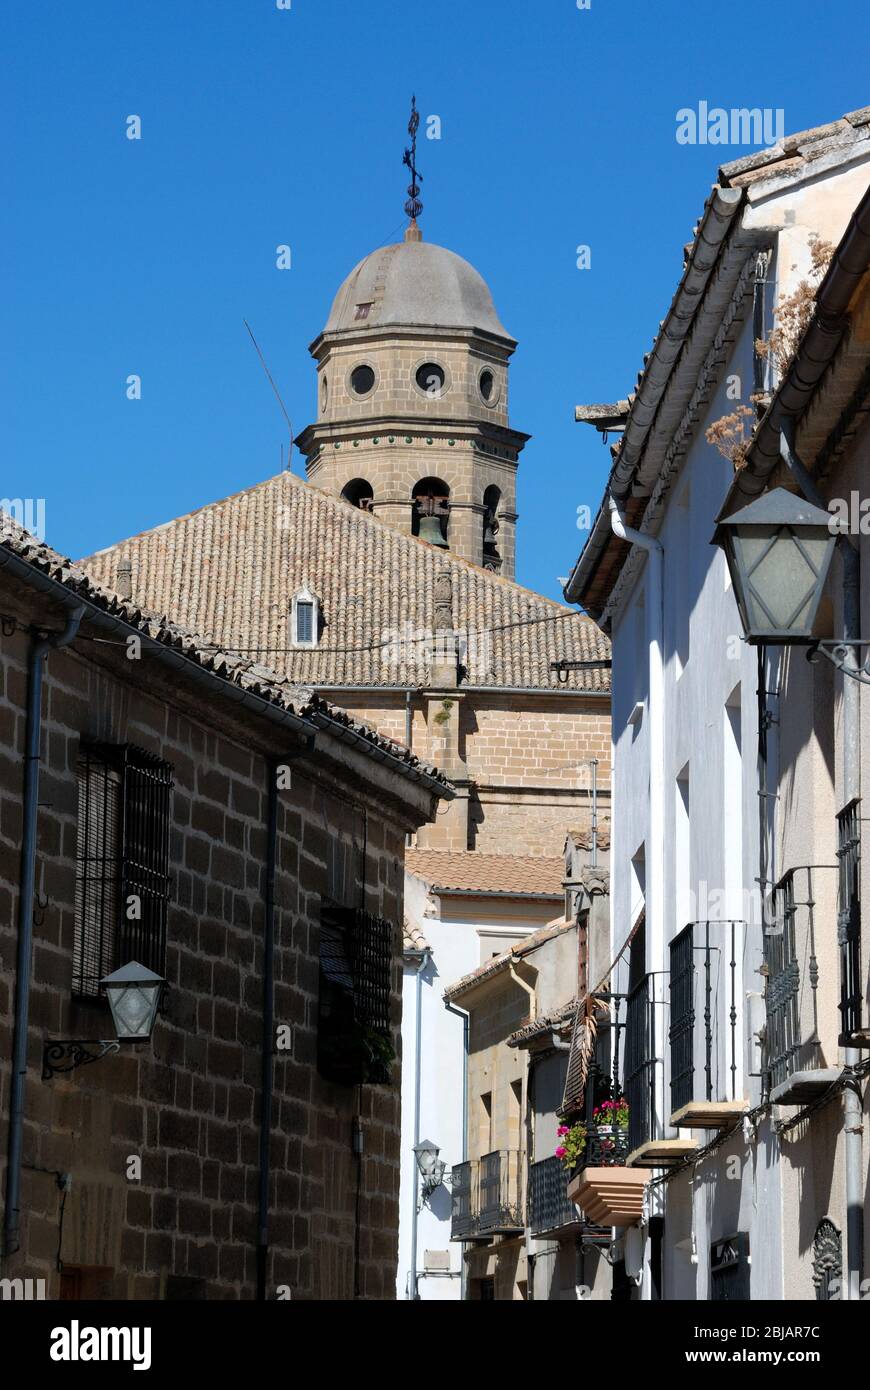 View of the Cathedral bell tower seen at the end of an old town street, Baeza, Jaen Province, Andalucia, Spain, Western Europe Stock Photo